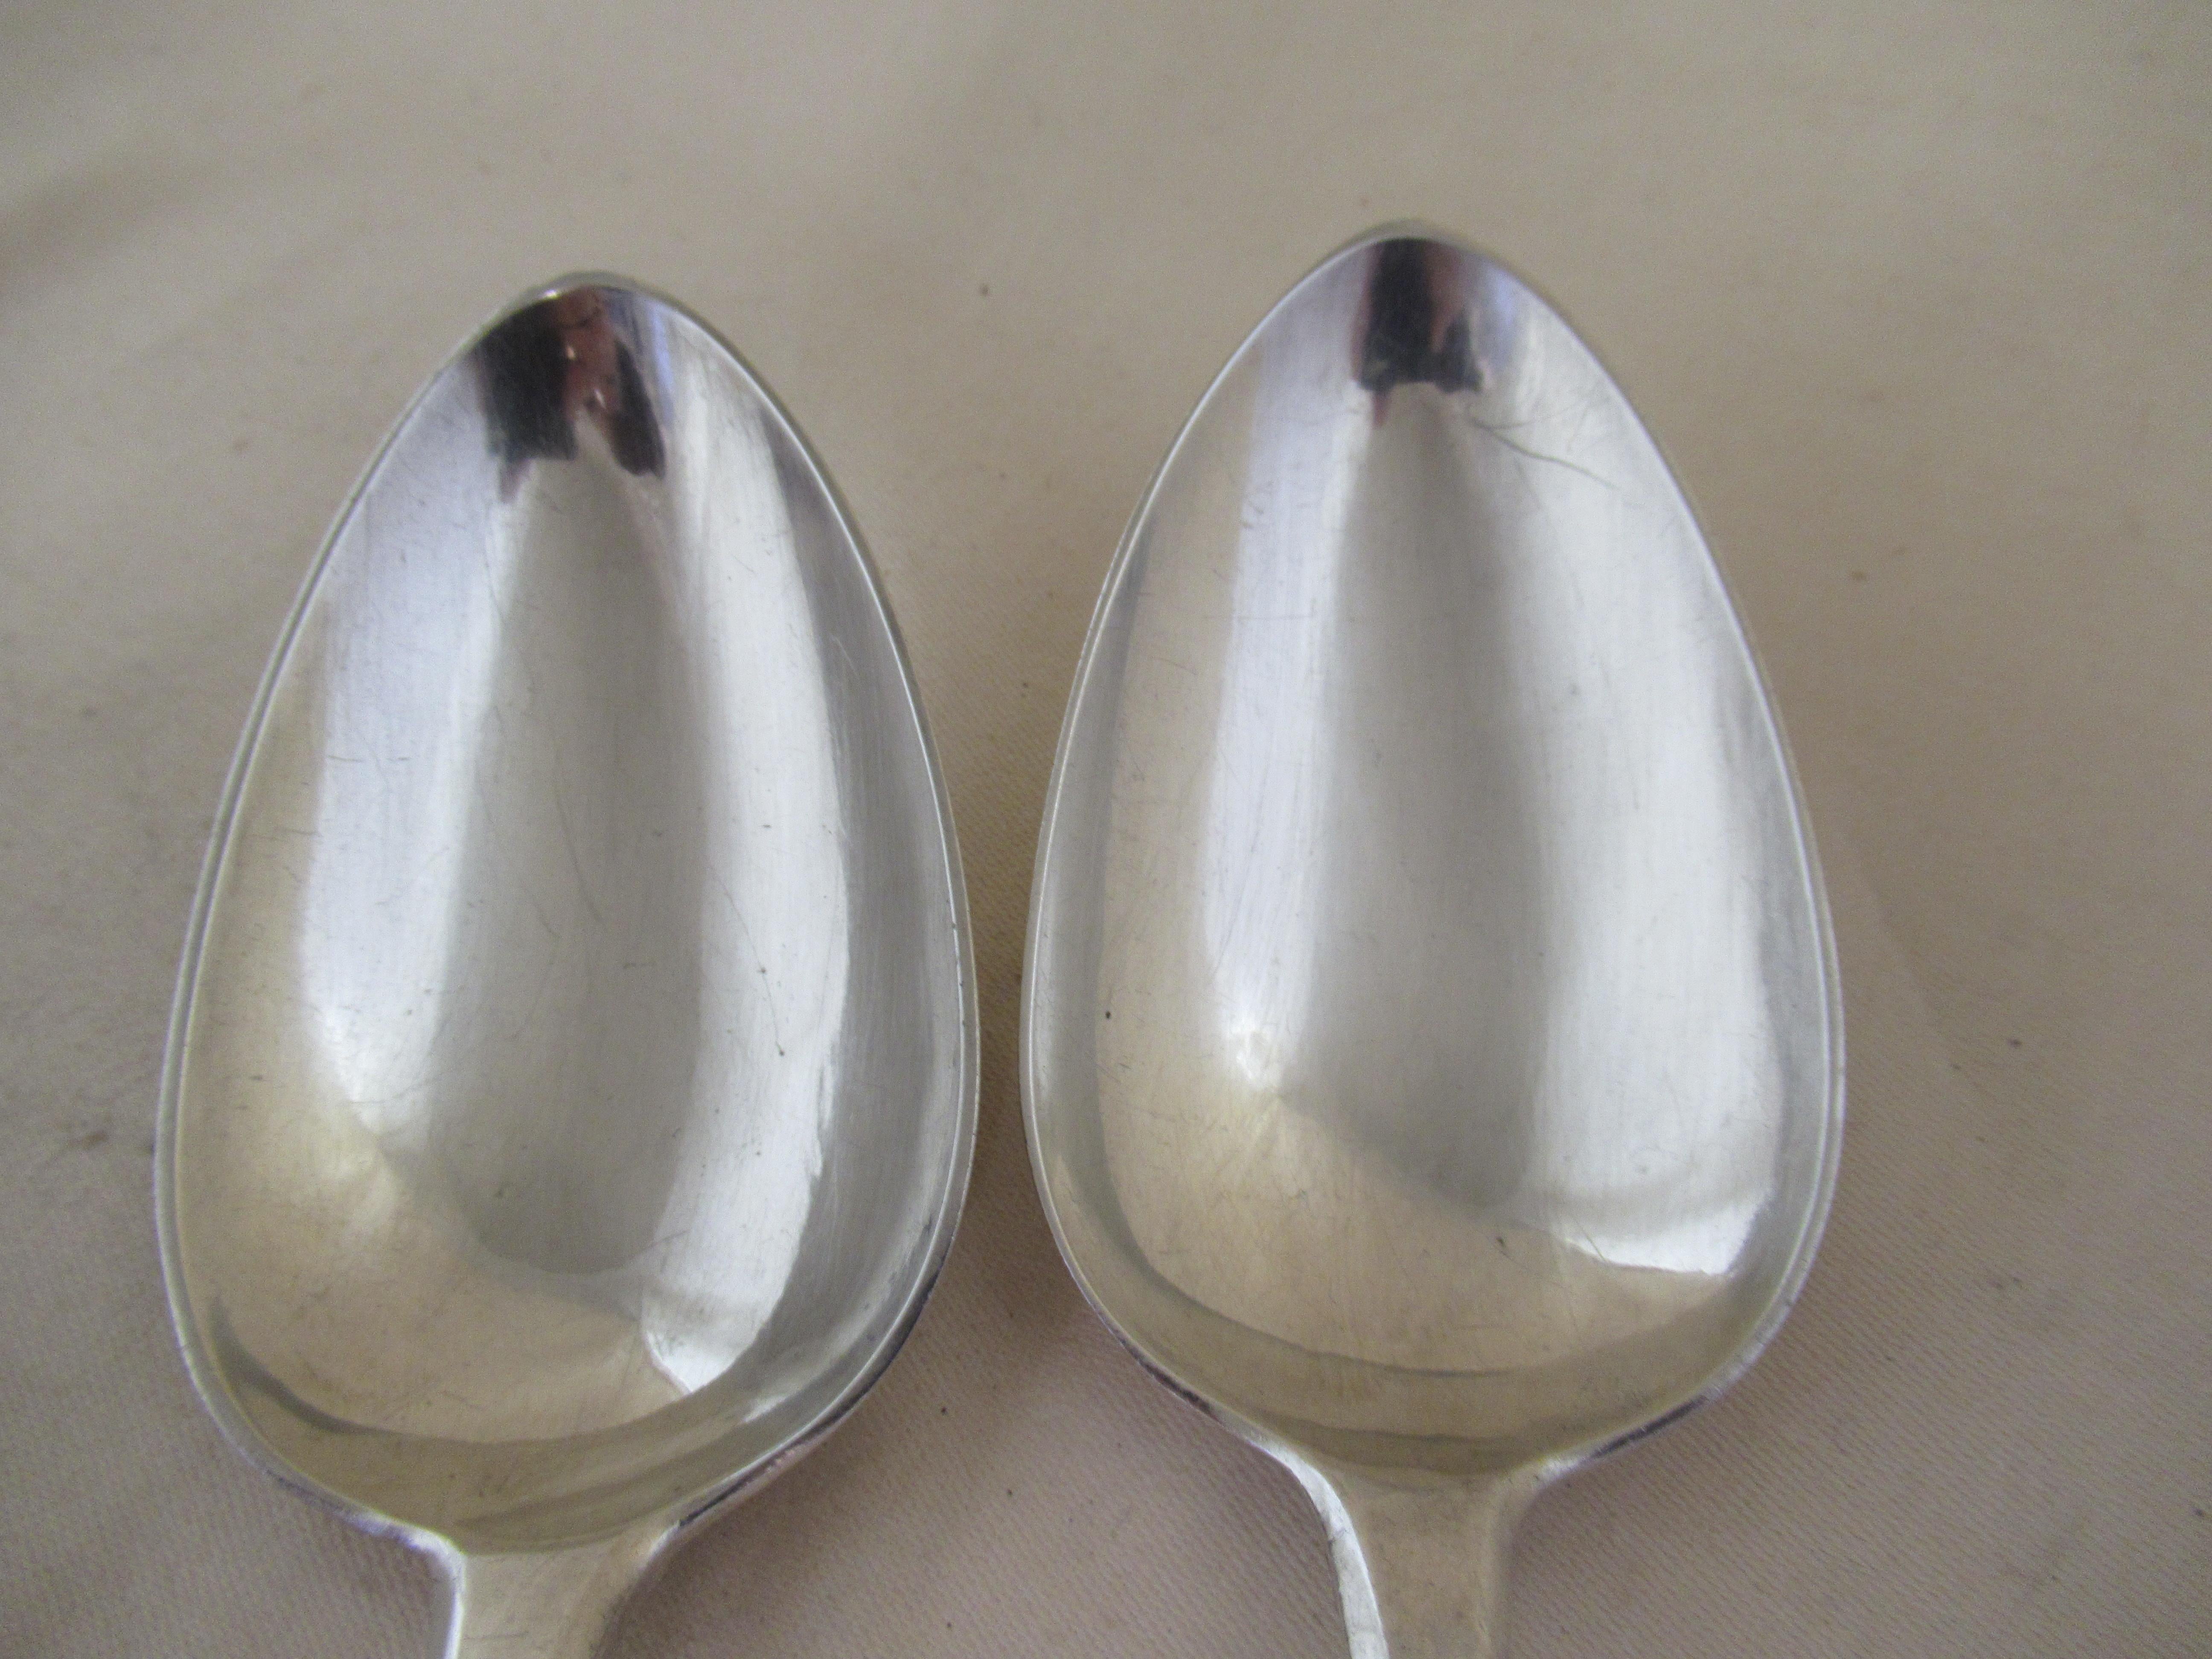 Sterling silver - Pair of tablespoons By Peter & William Bateman.
Full English hallmarks, applied by the London Assay Office.:-
 KIng`s Head - duty mark shows that duty has been paid to the crown.
 (duty was paid from 1784 until 1890)
 Upper